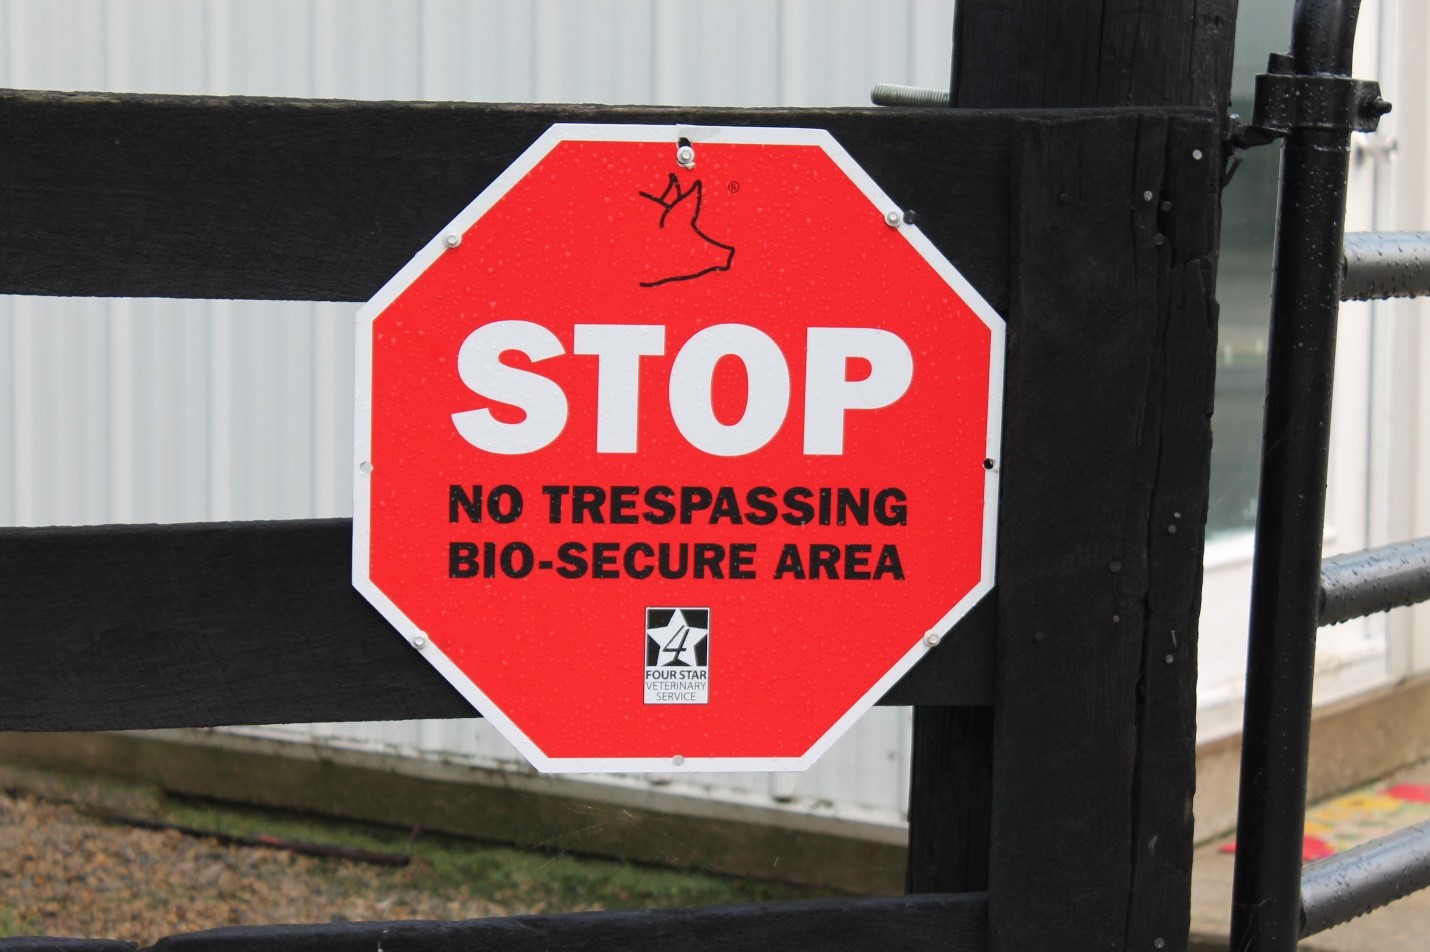 biosecurity sign provided by National Pork Board